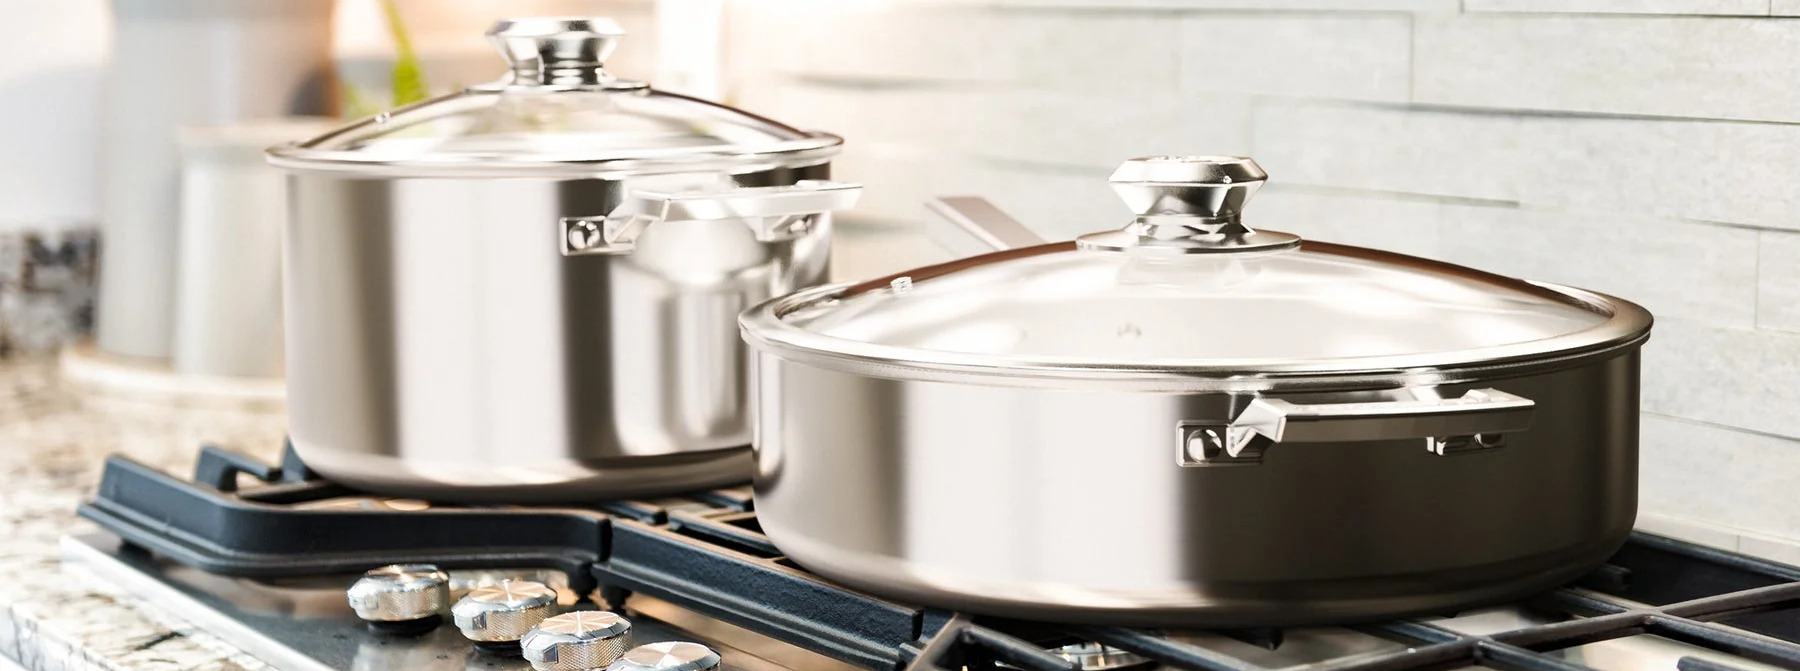 how to clean pots and pans